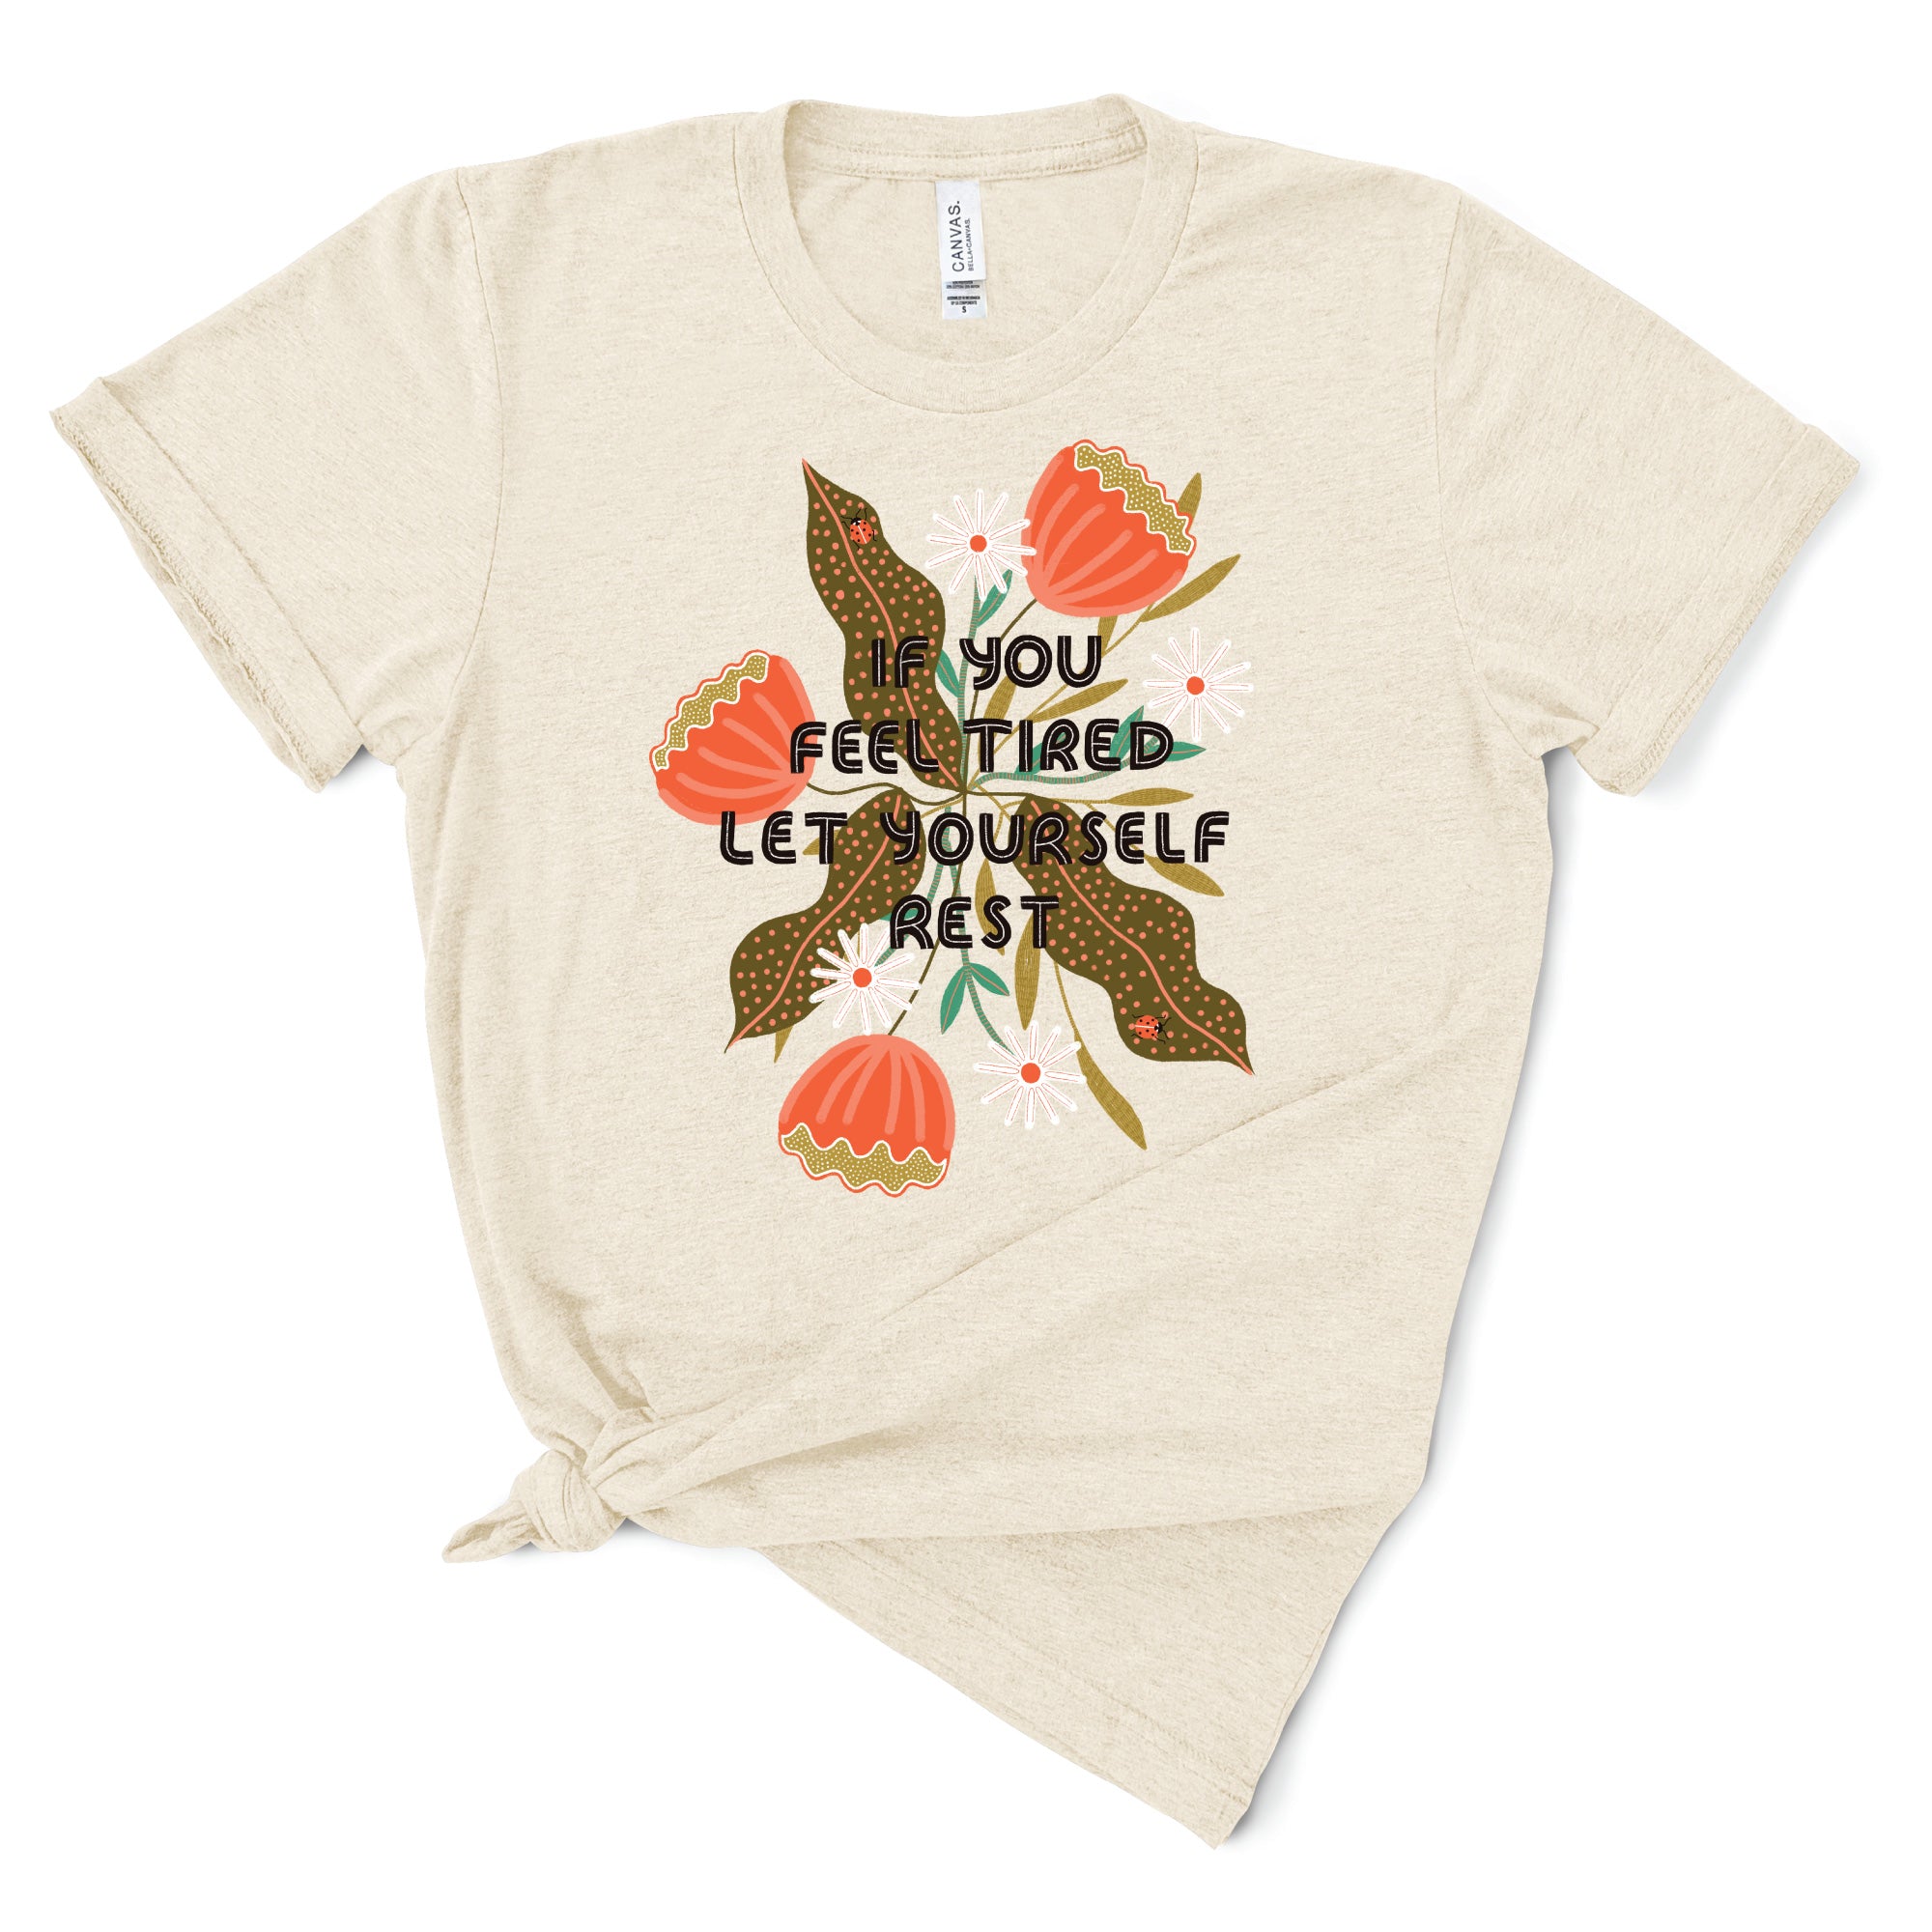 Let Yourself Rest Tee/ T Shirt